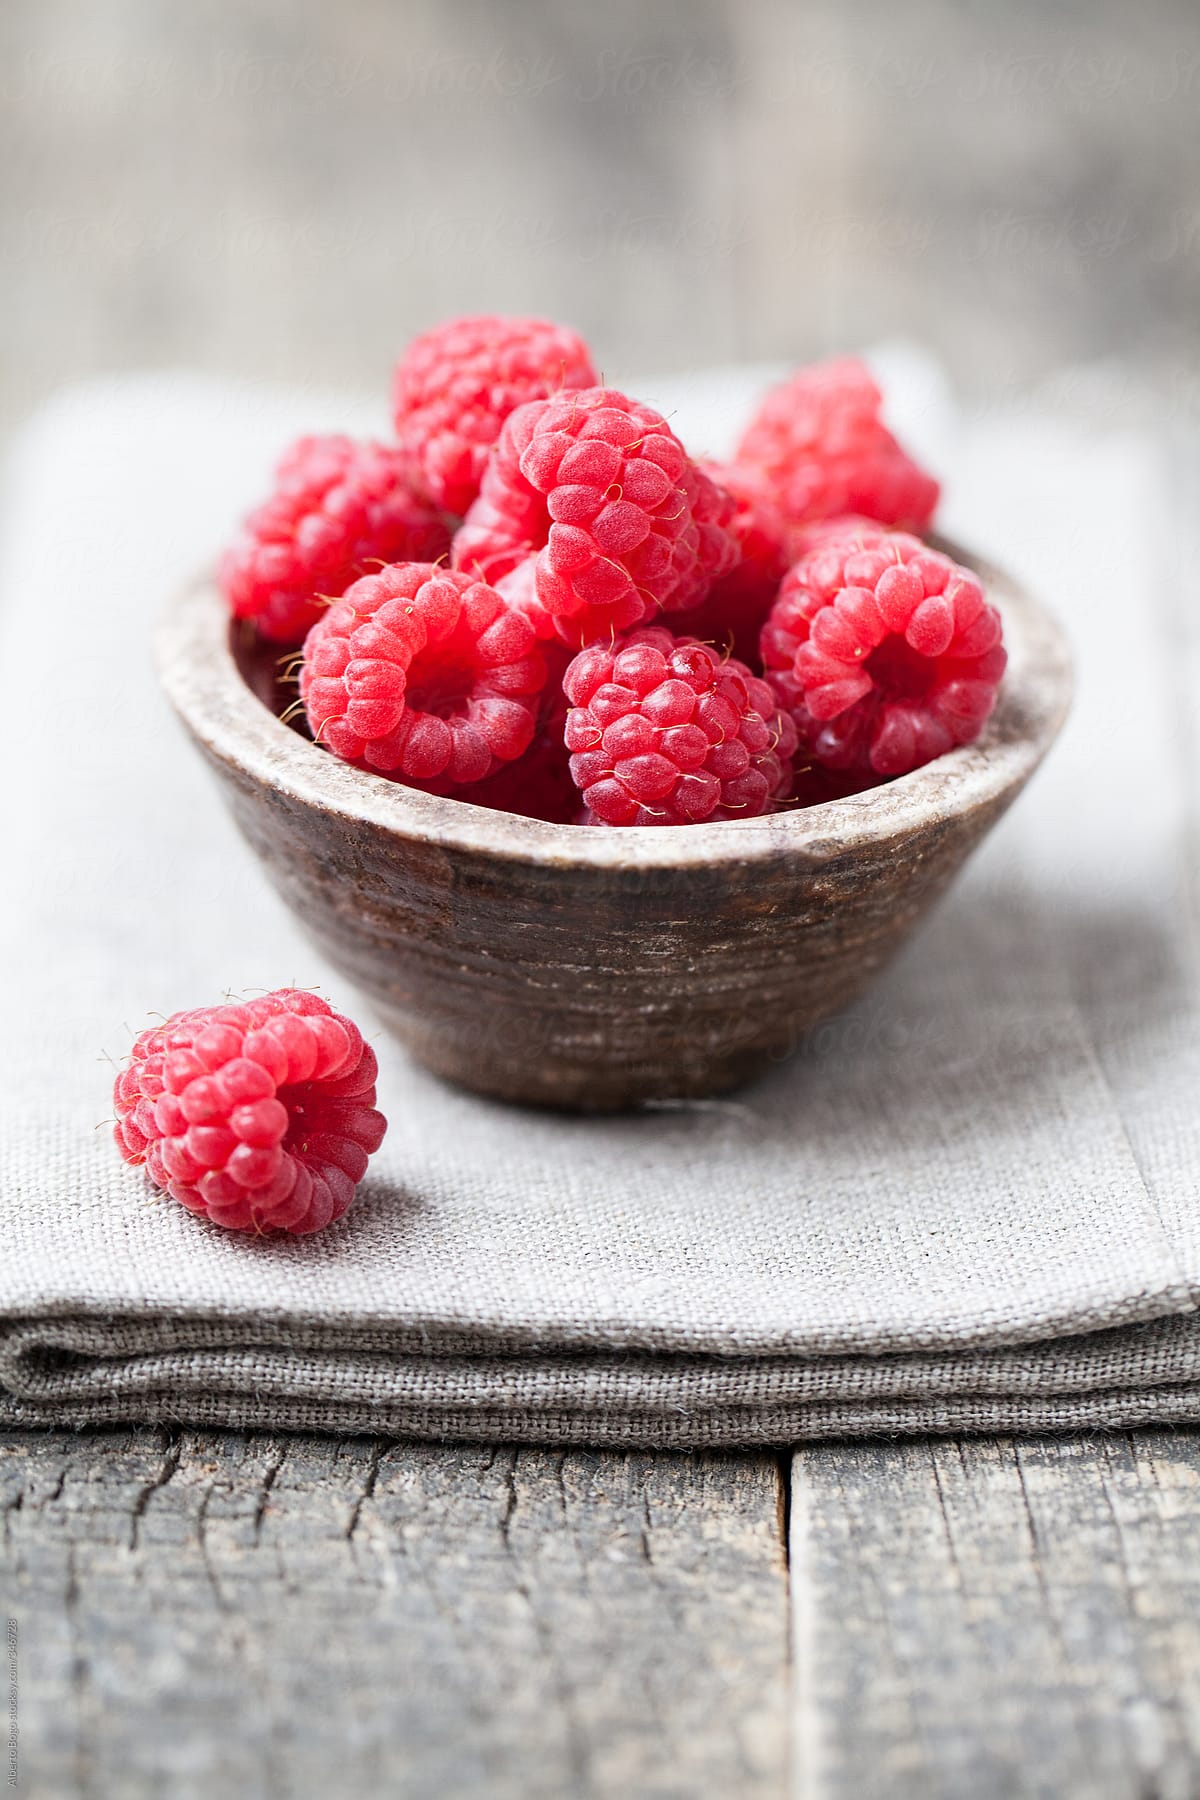 Fresh And Sweet Raspberries on the Rustic Table